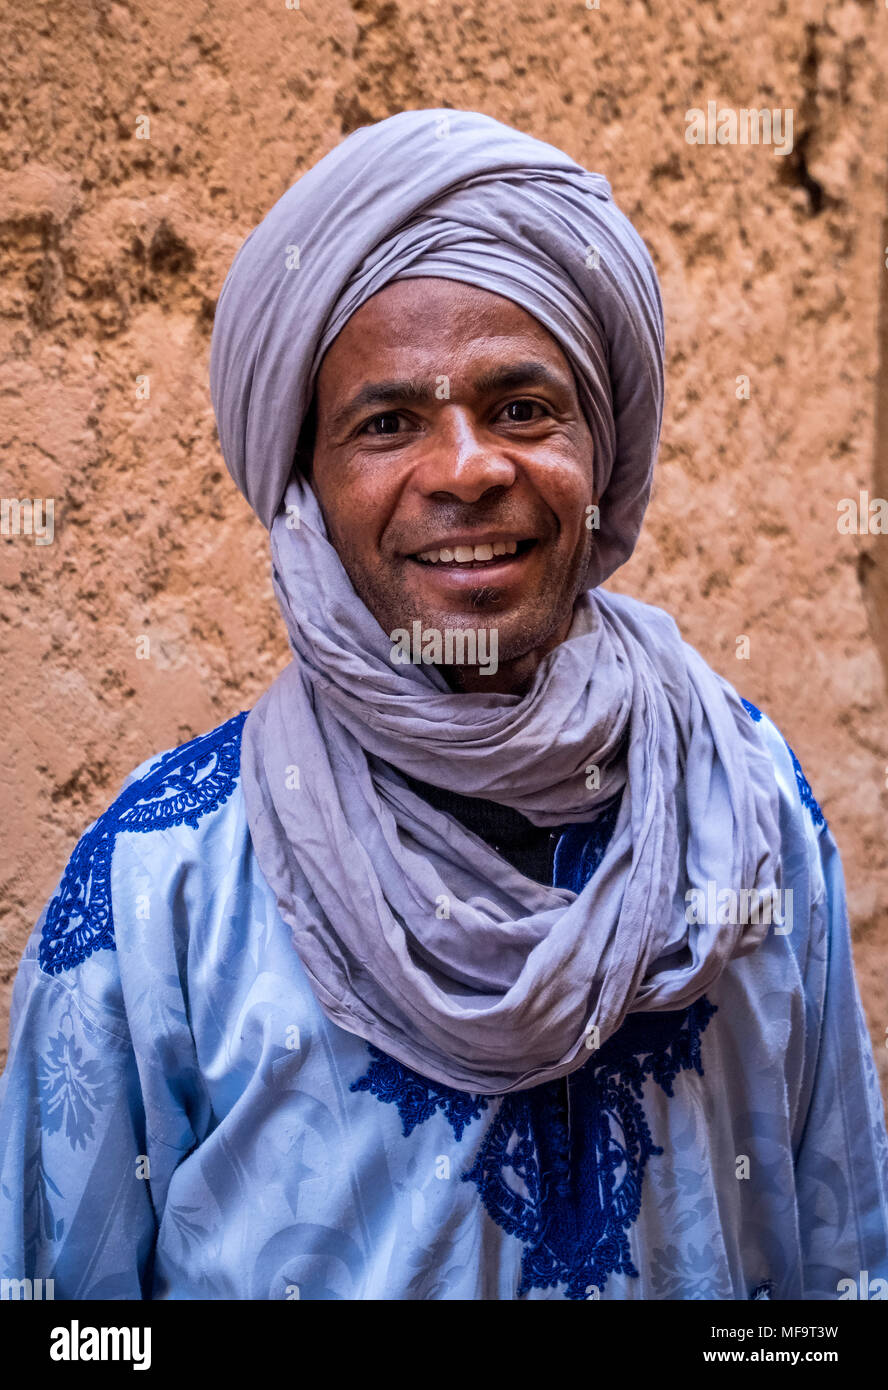 Portrait of a Berber Man in traditional dress, Tinerhir, Todgha Gorge, High Atlas, Morocco Stock Photo